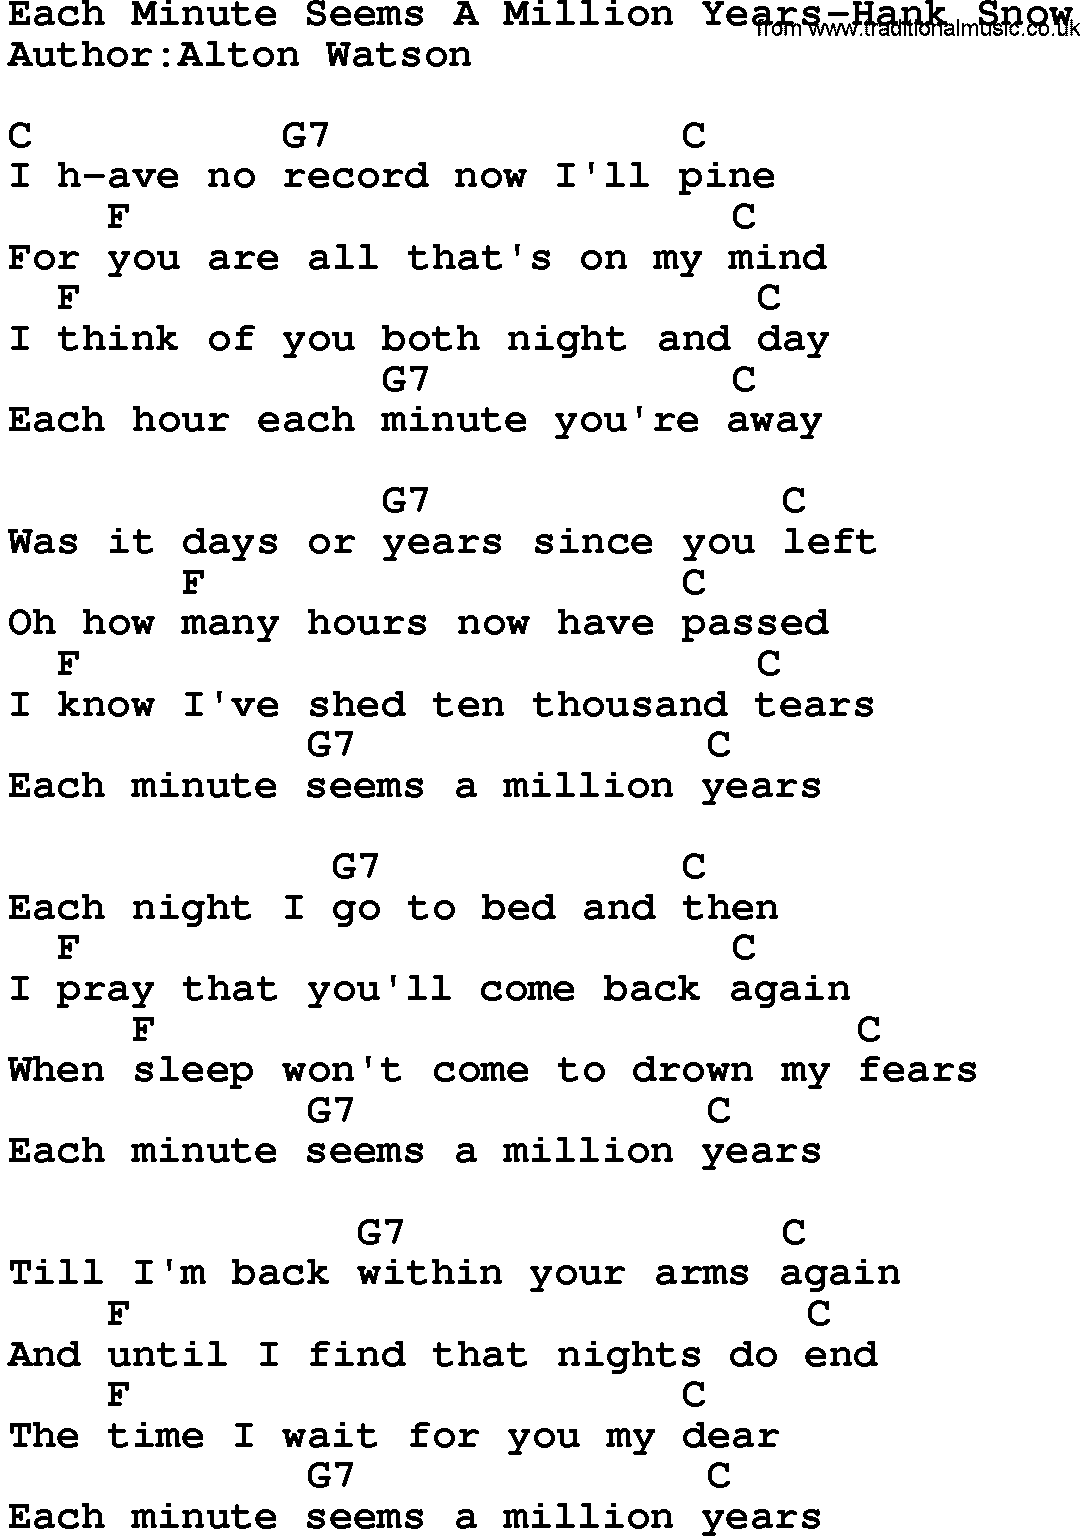 Country music song: Each Minute Seems A Million Years-Hank Snow lyrics and chords